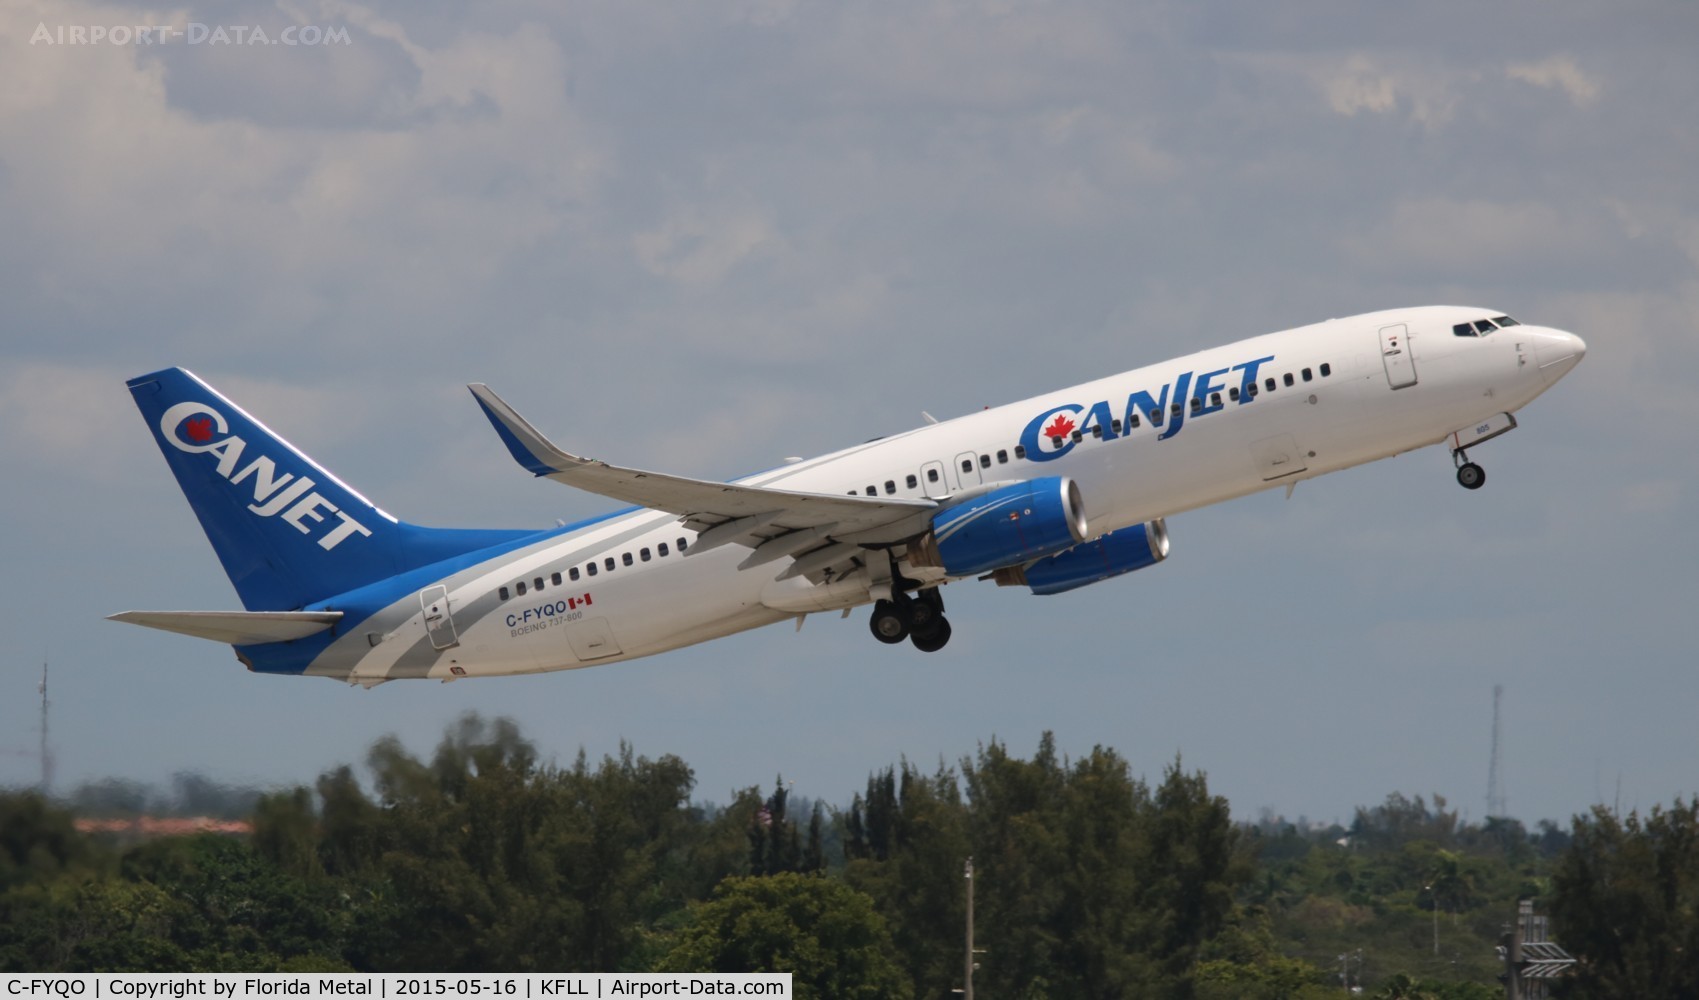 C-FYQO, 2002 Boeing 737-8AS C/N 29934, Canjet 737-800 zx